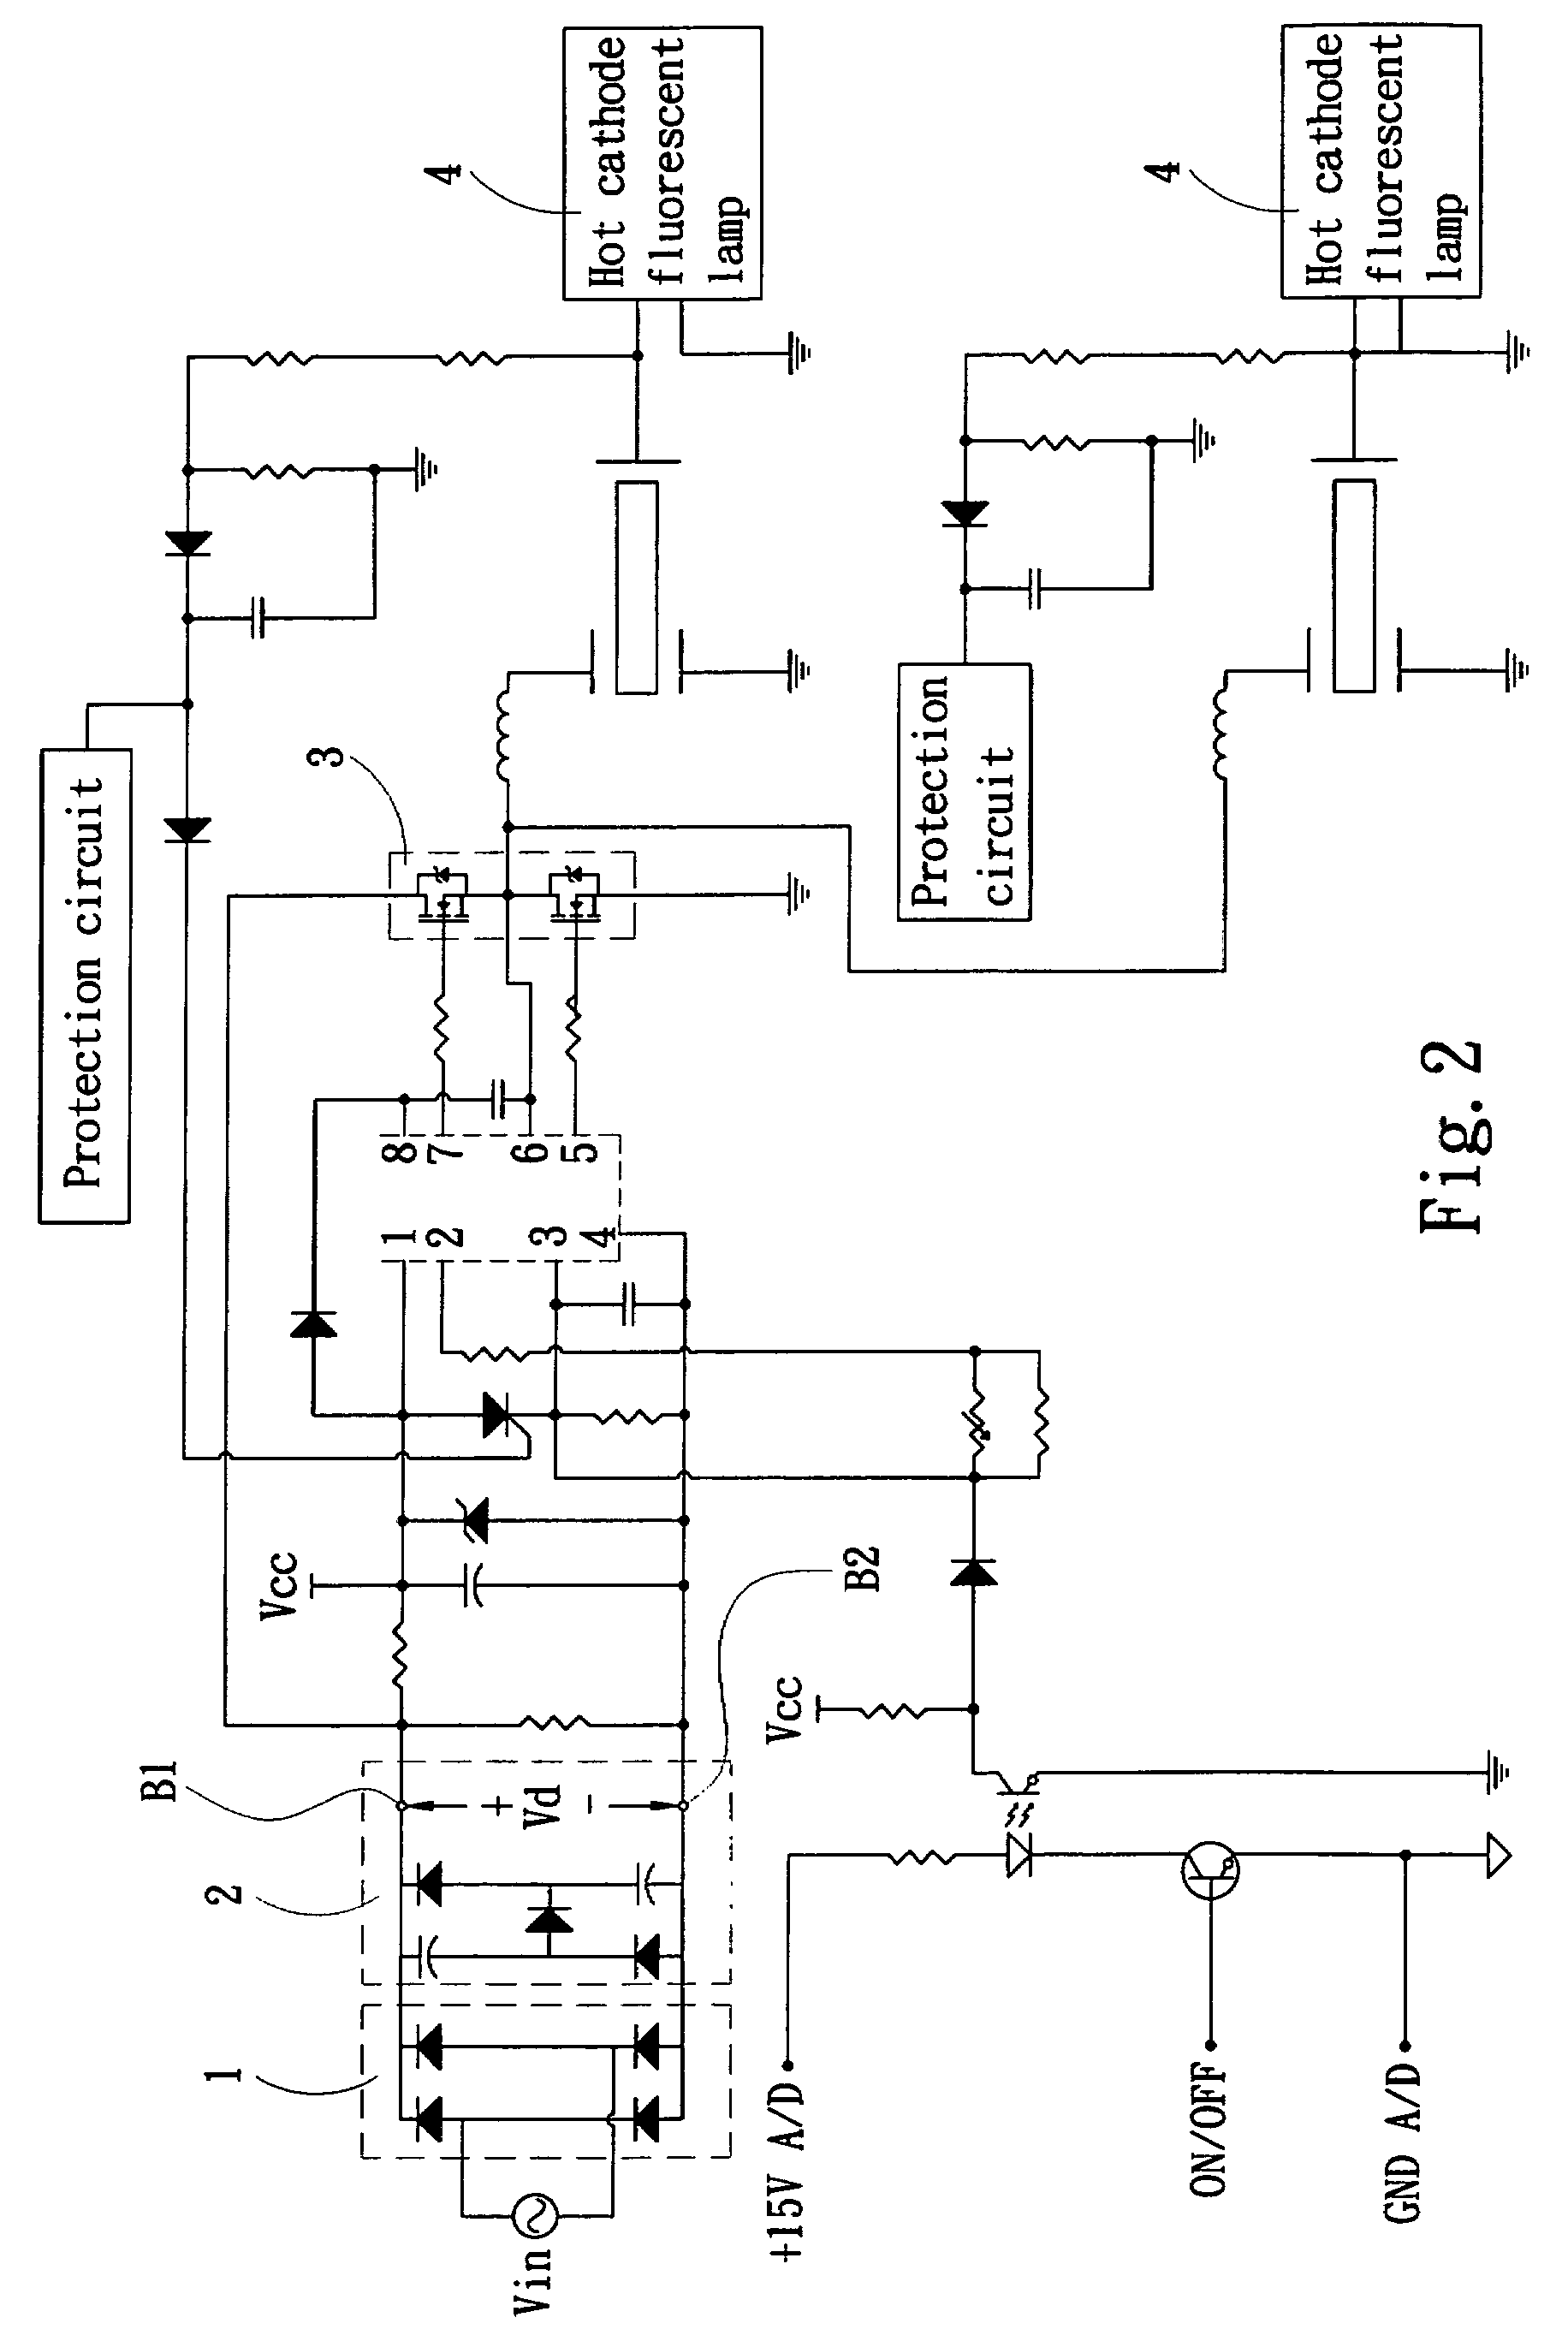 Driving circuit for hot cathode fluorescent lamps